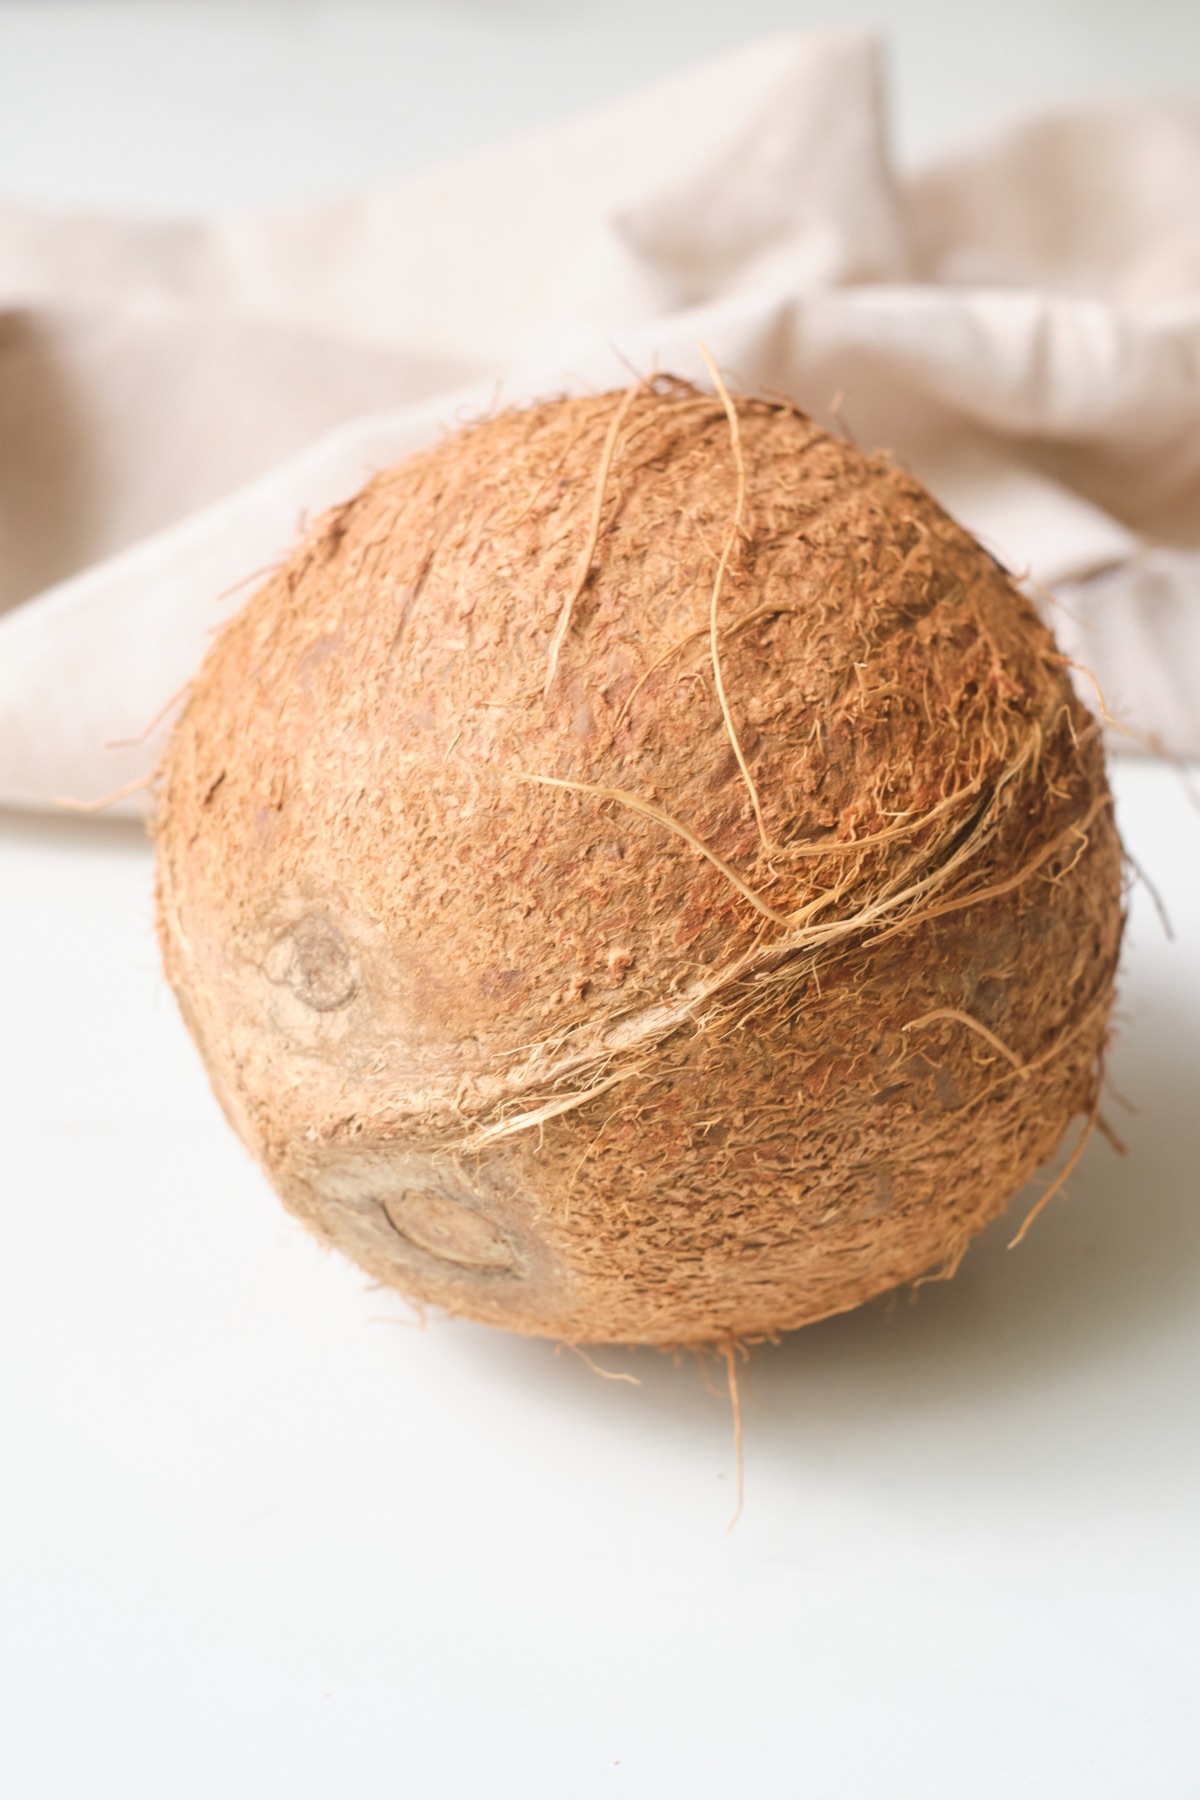 how to open a coconut the right way